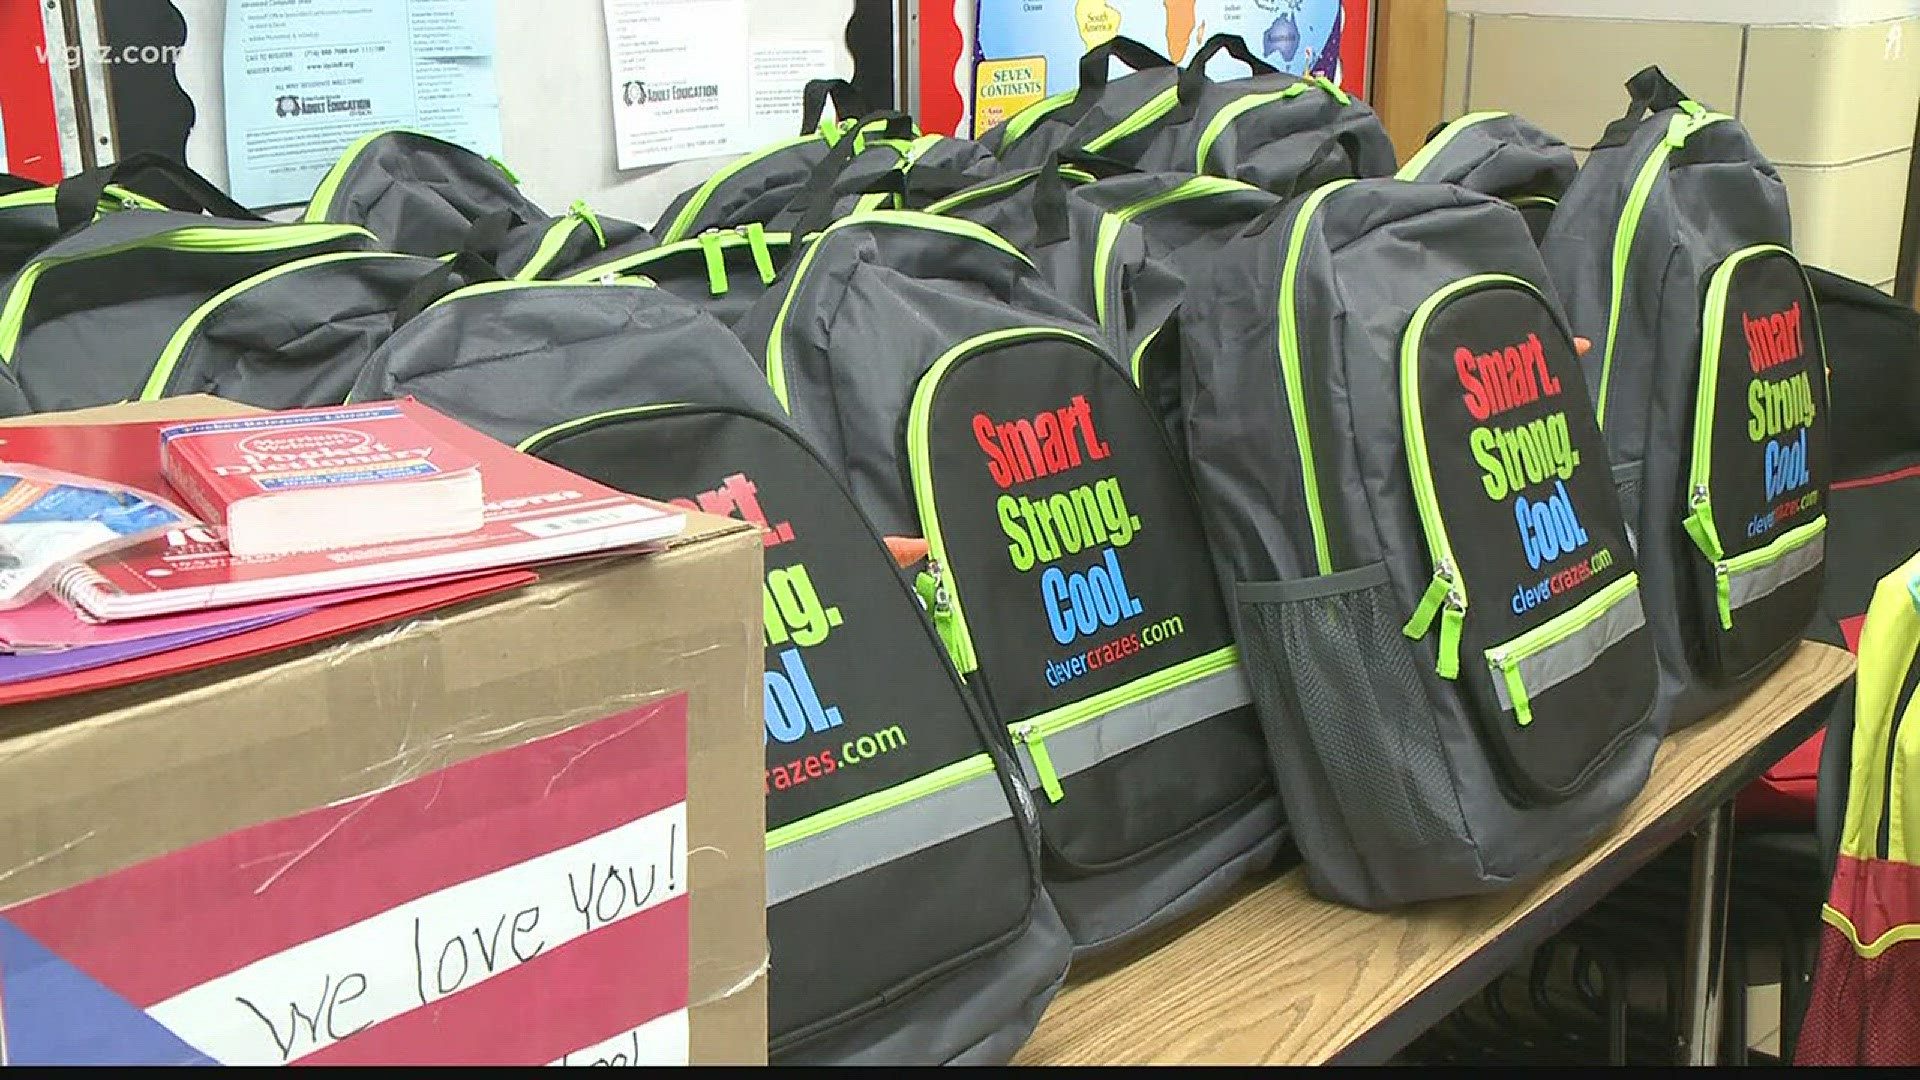 Buffalo Welcomes Puerto Rican Students With Backpacks